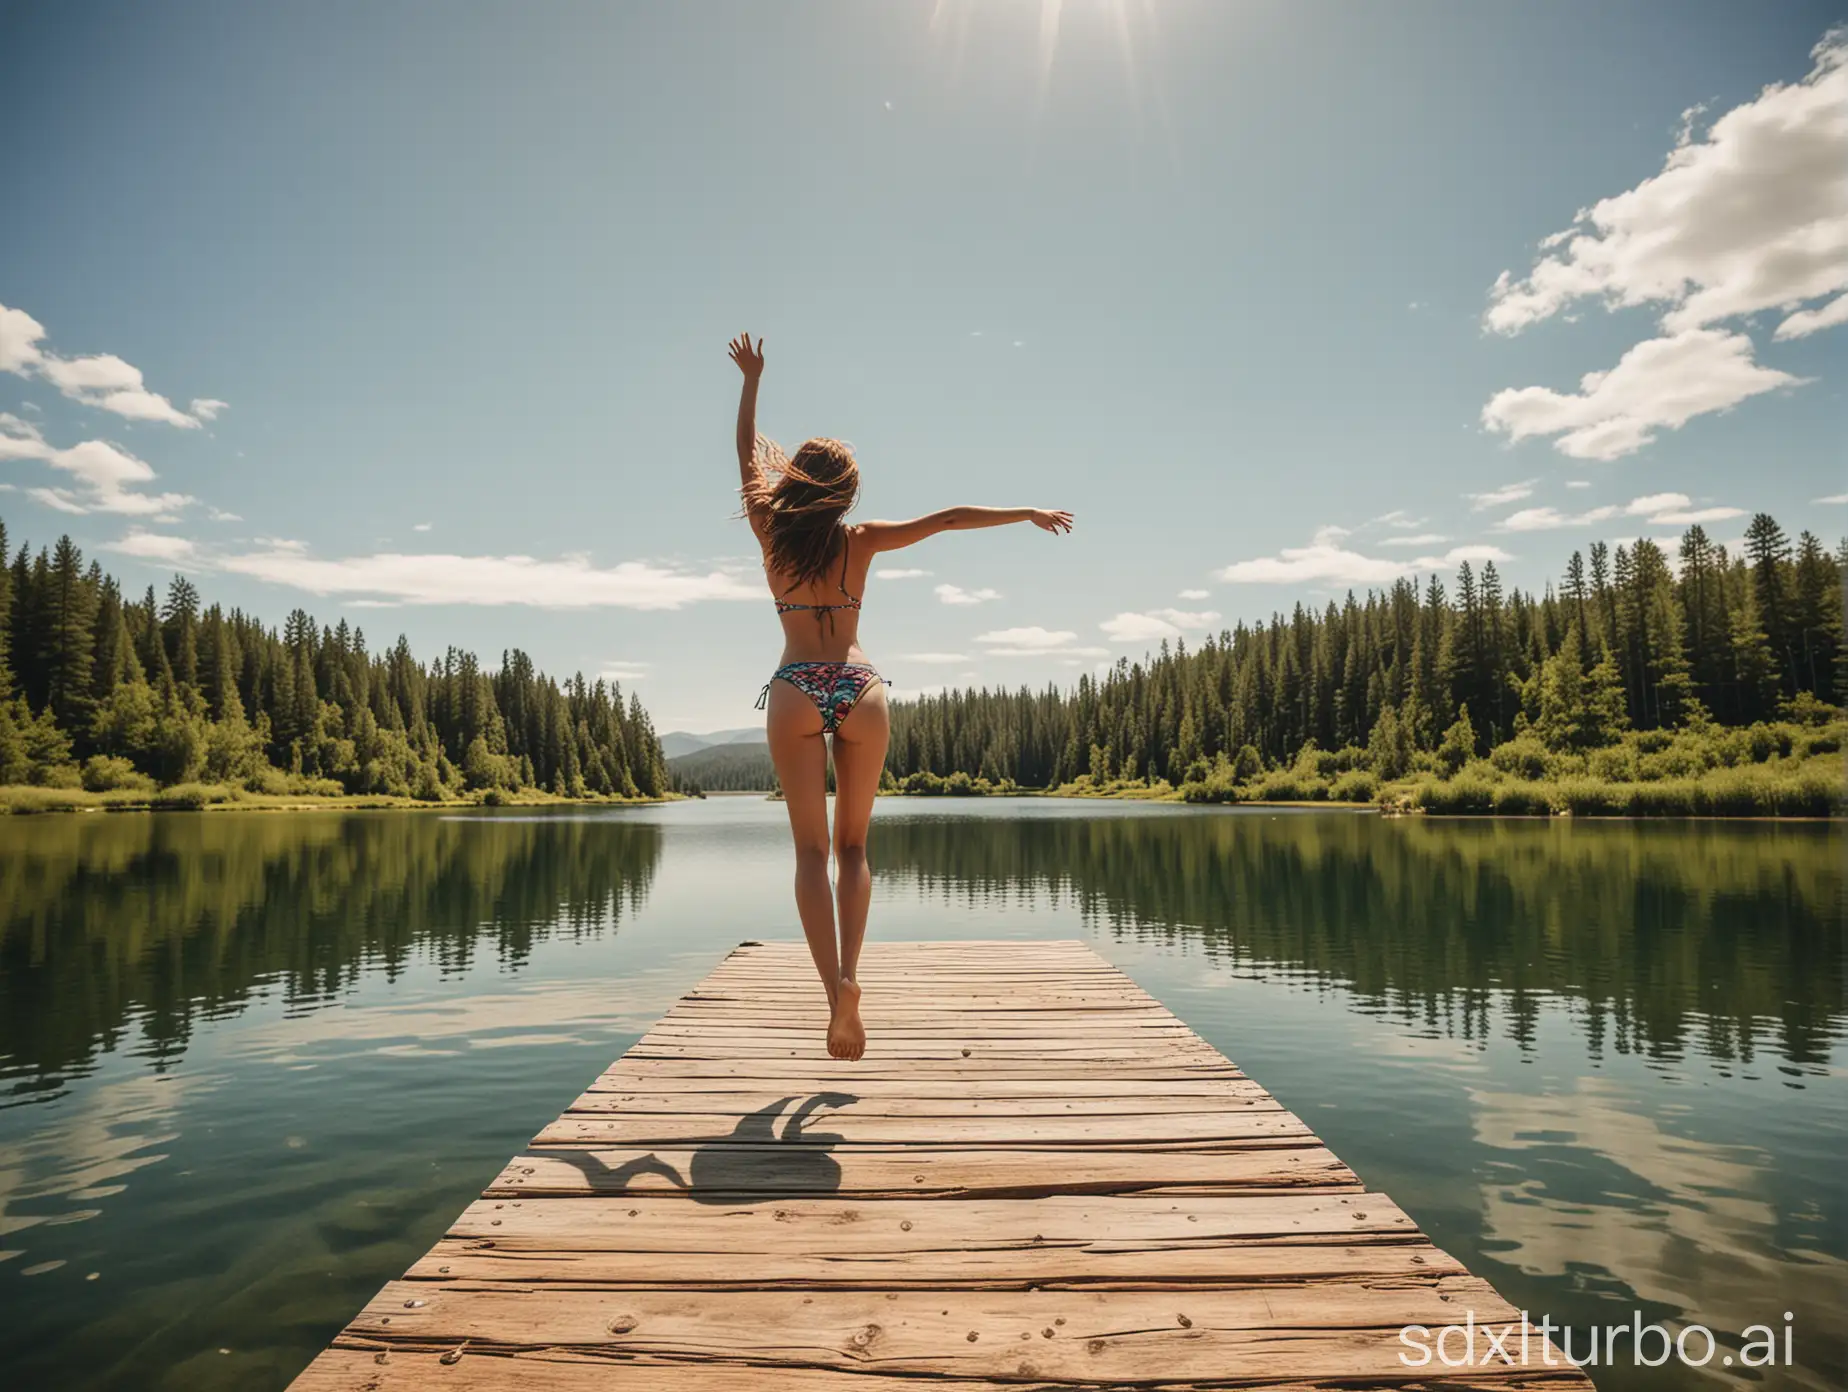 Lifestyle-Photography-Female-Model-Jumping-Off-Wooden-Dock-into-Serene-American-Lake